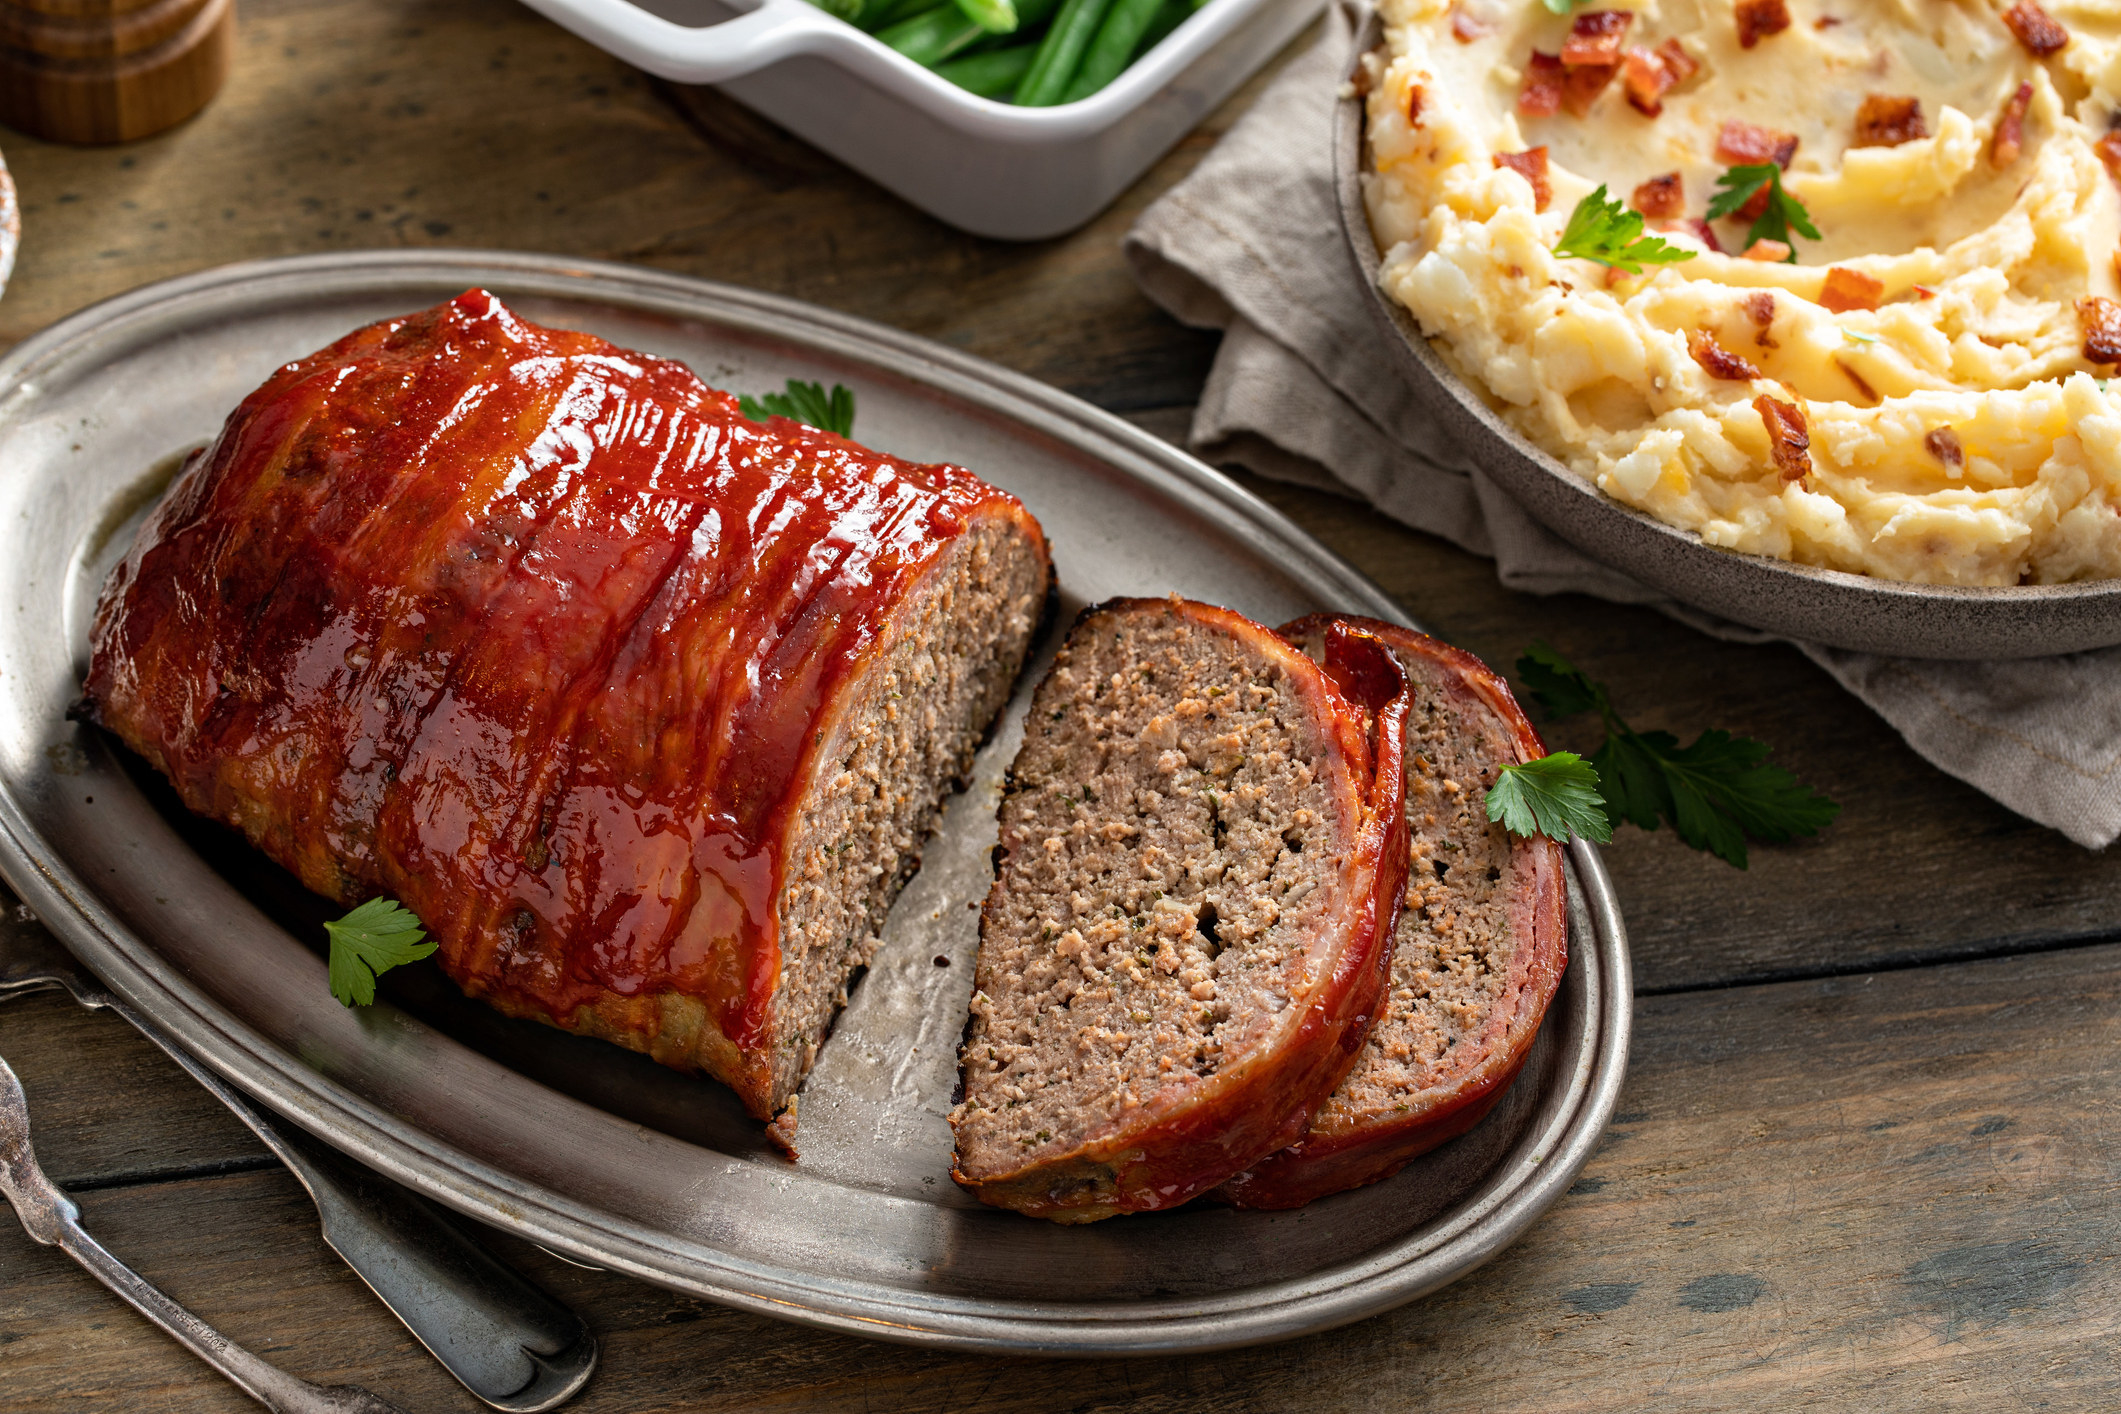 Bacon-wrapped meatloaf sliced on a serving plate for dinner